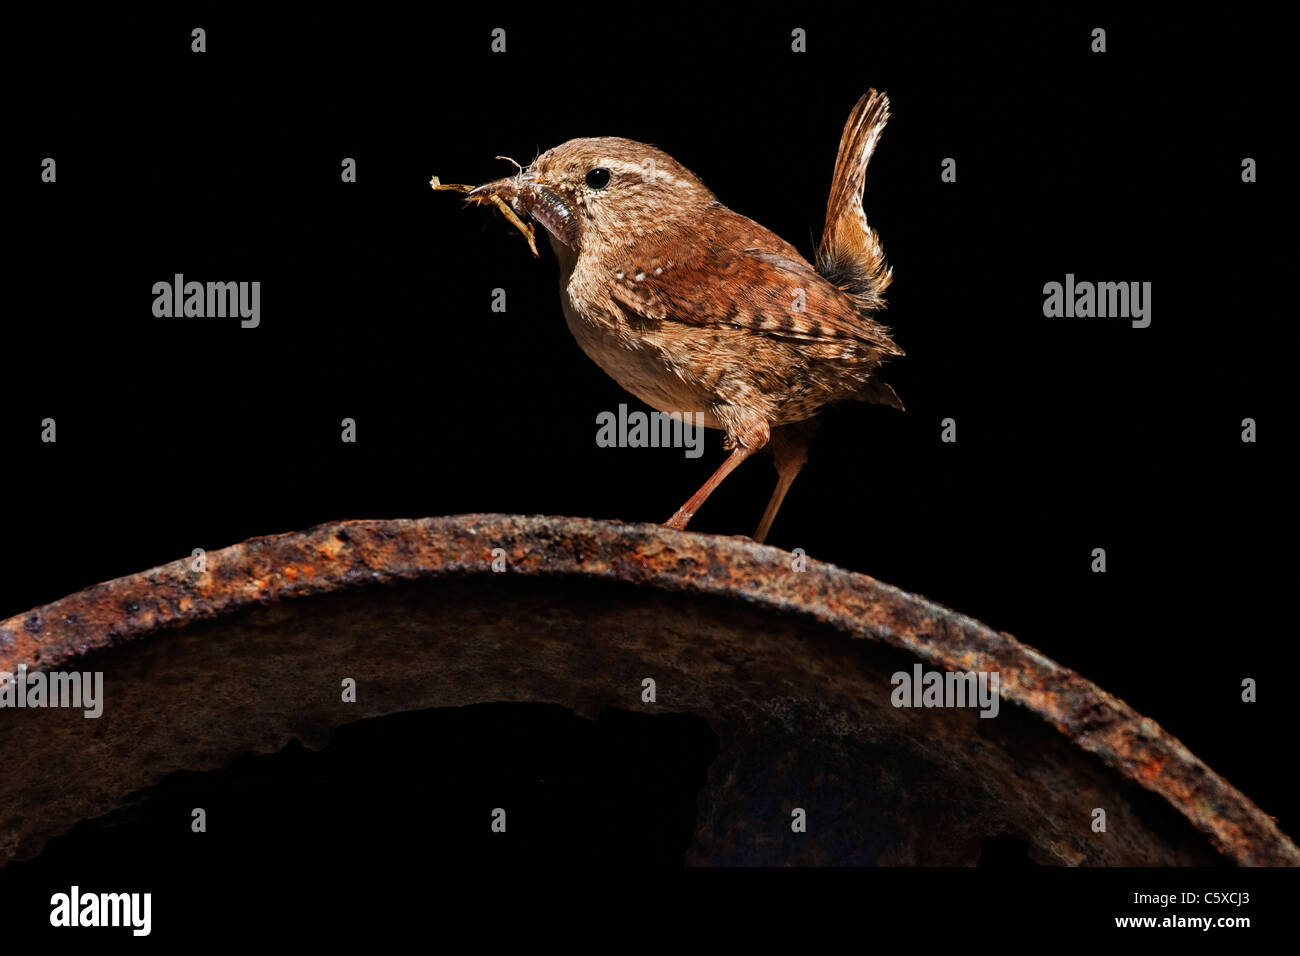 Wren on metal wheel with insect. Stock Photo